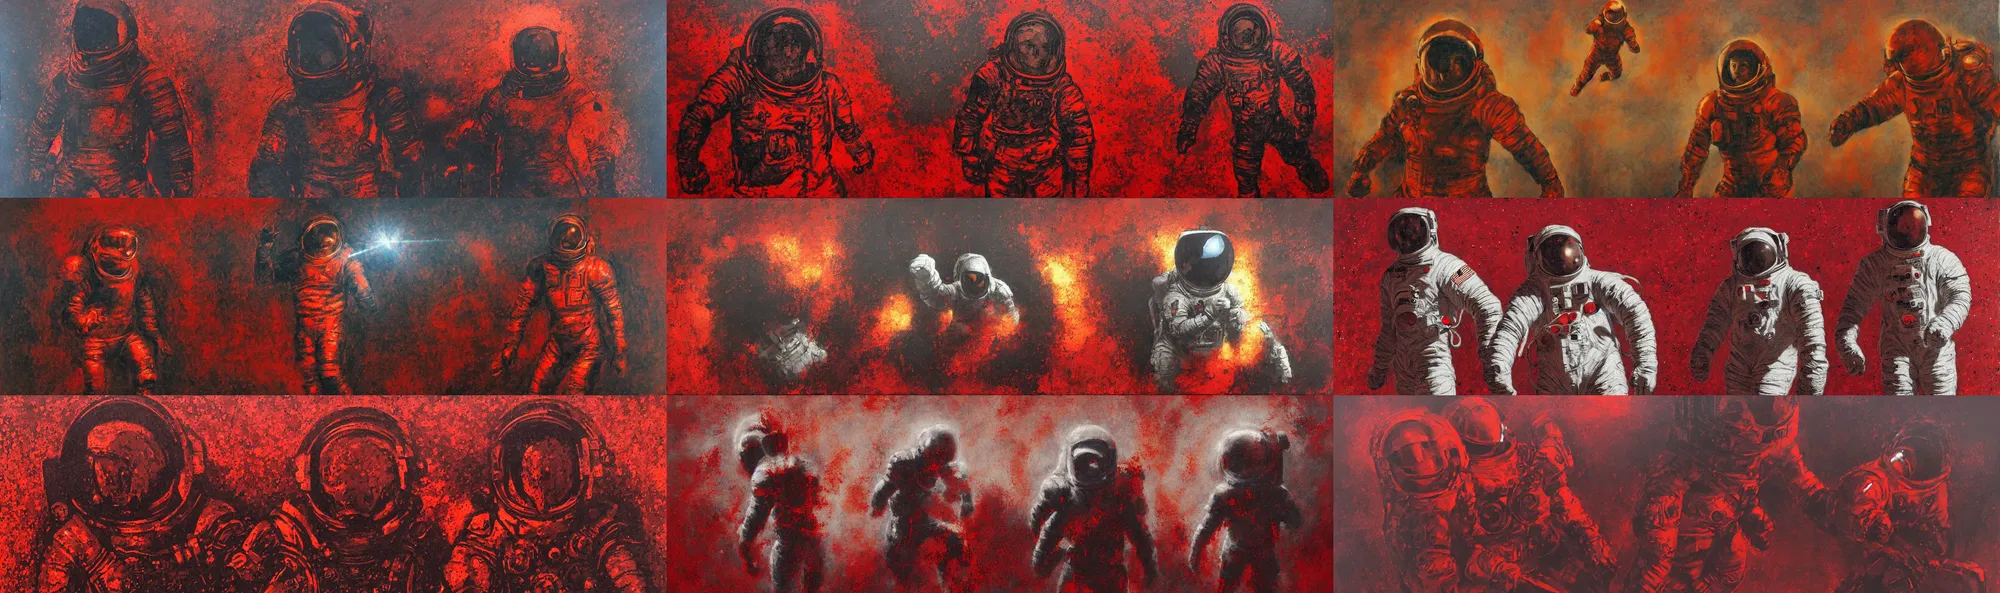 Prompt: astronaut!! - gladiators!! with ceramic armor and knives, tonalist, luminist, symbolist, figurative art, concept art, chiaroscuro, grisaille, palette knife, frenetic, stippling, shadows, luminous, sublime, edge lighting, backlighting, burnt sienna and venetian red